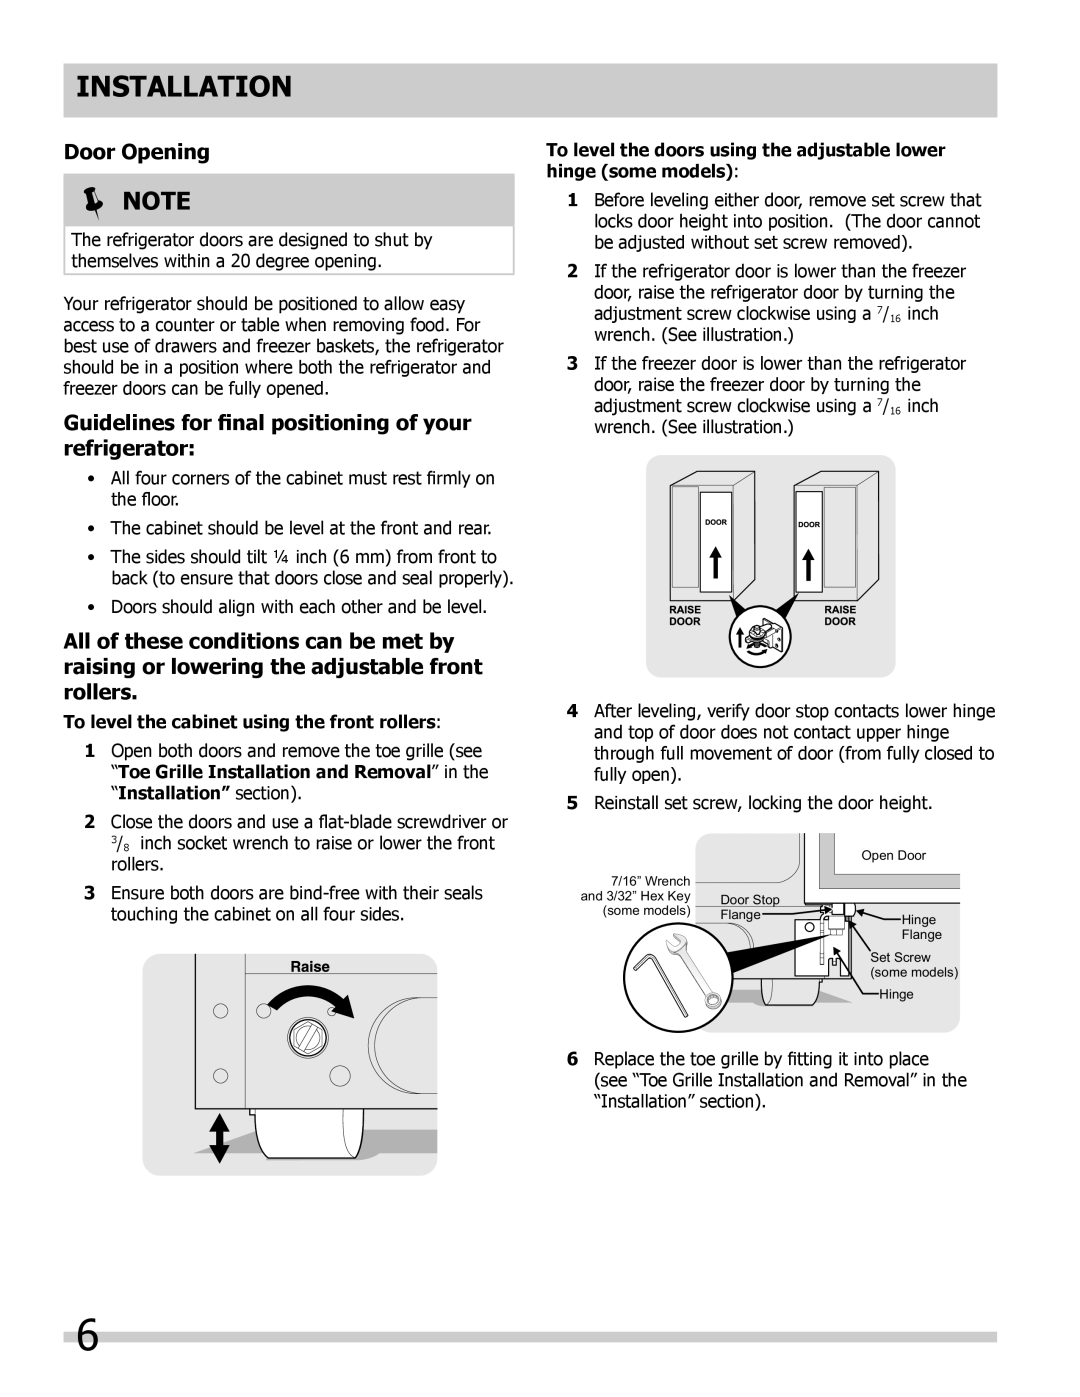 Frigidaire 242111900 manual Door Opening, Guidelines for final positioning of your refrigerator, Installation,  Note 